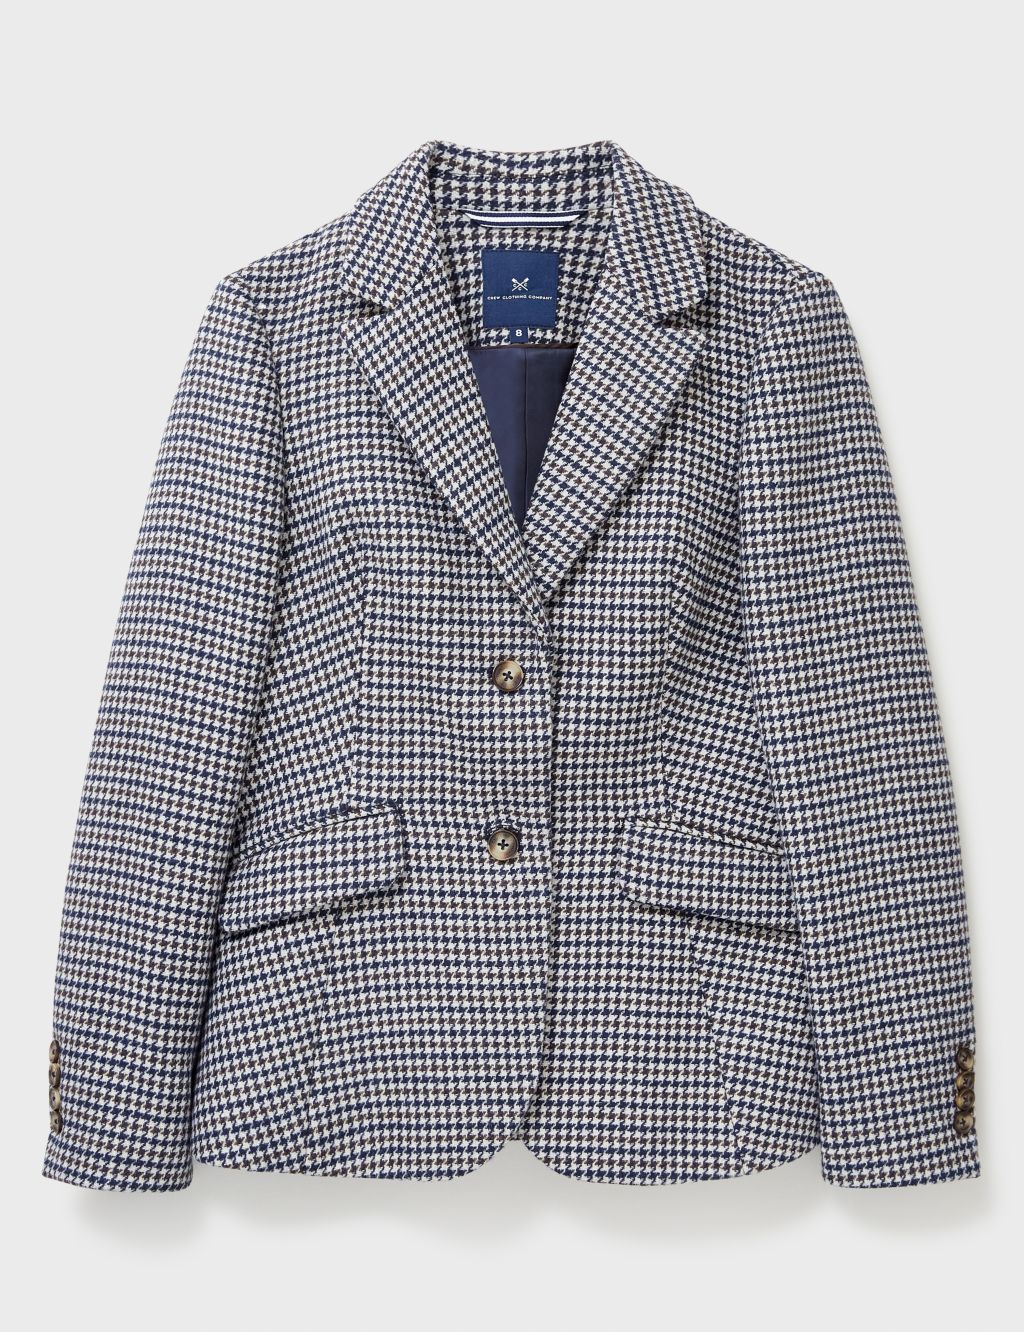 Buy Tailored Houndstooth Blazer with Wool | Crew Clothing | M&S